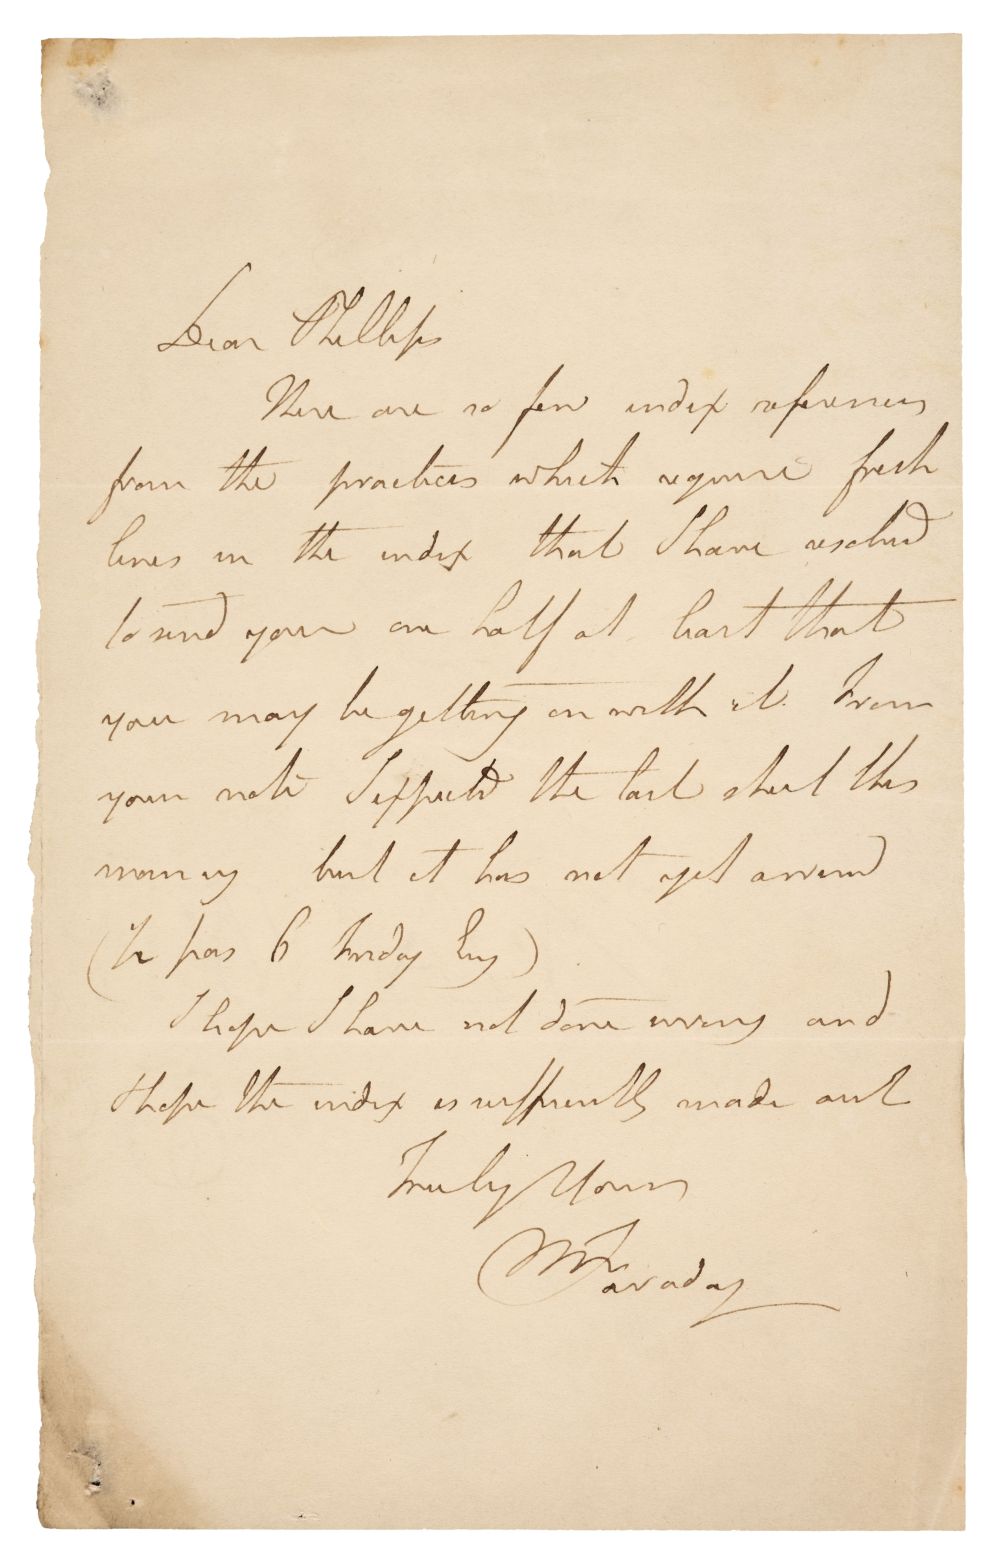 Faraday (Michael, 1791-1867), Autograph Letter Signed, ‘’M. Faraday’, no place, no date